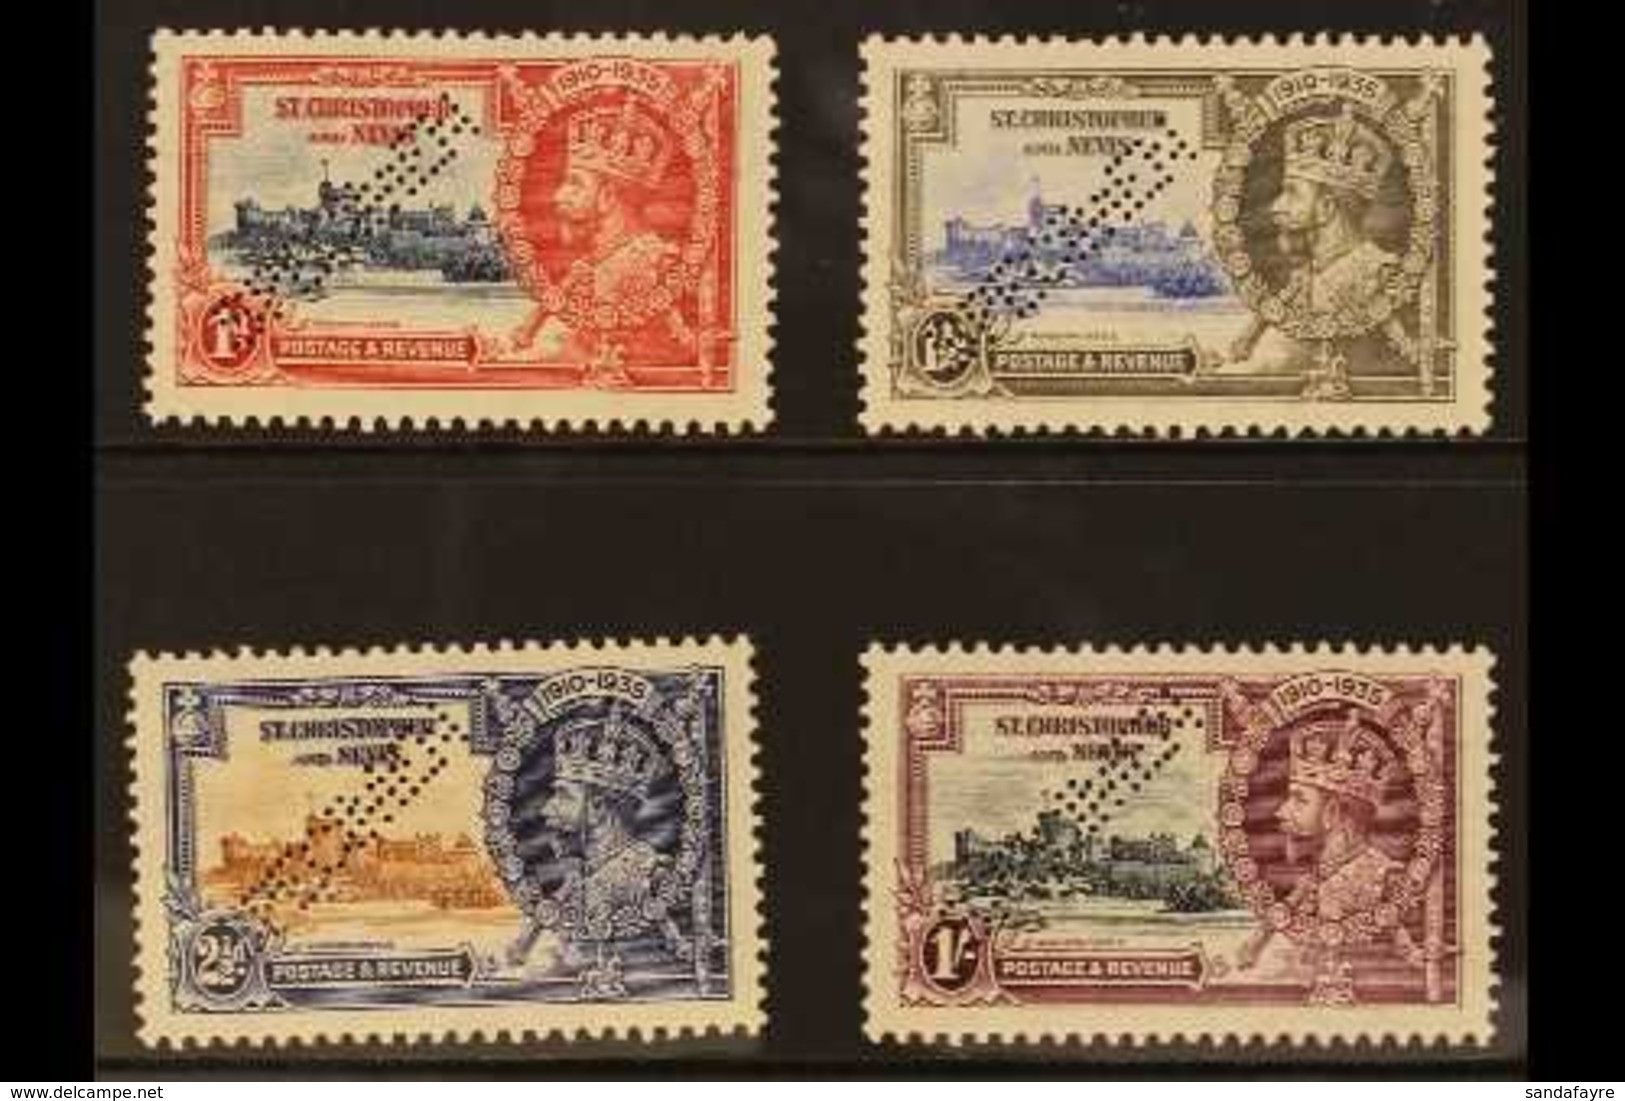 1935 Silver Jubilee Set, Perf. "SPECIMEN", SG 61/64s, Superb Never Hinged Mint. (4) For More Images, Please Visit Http:/ - St.Kitts Und Nevis ( 1983-...)